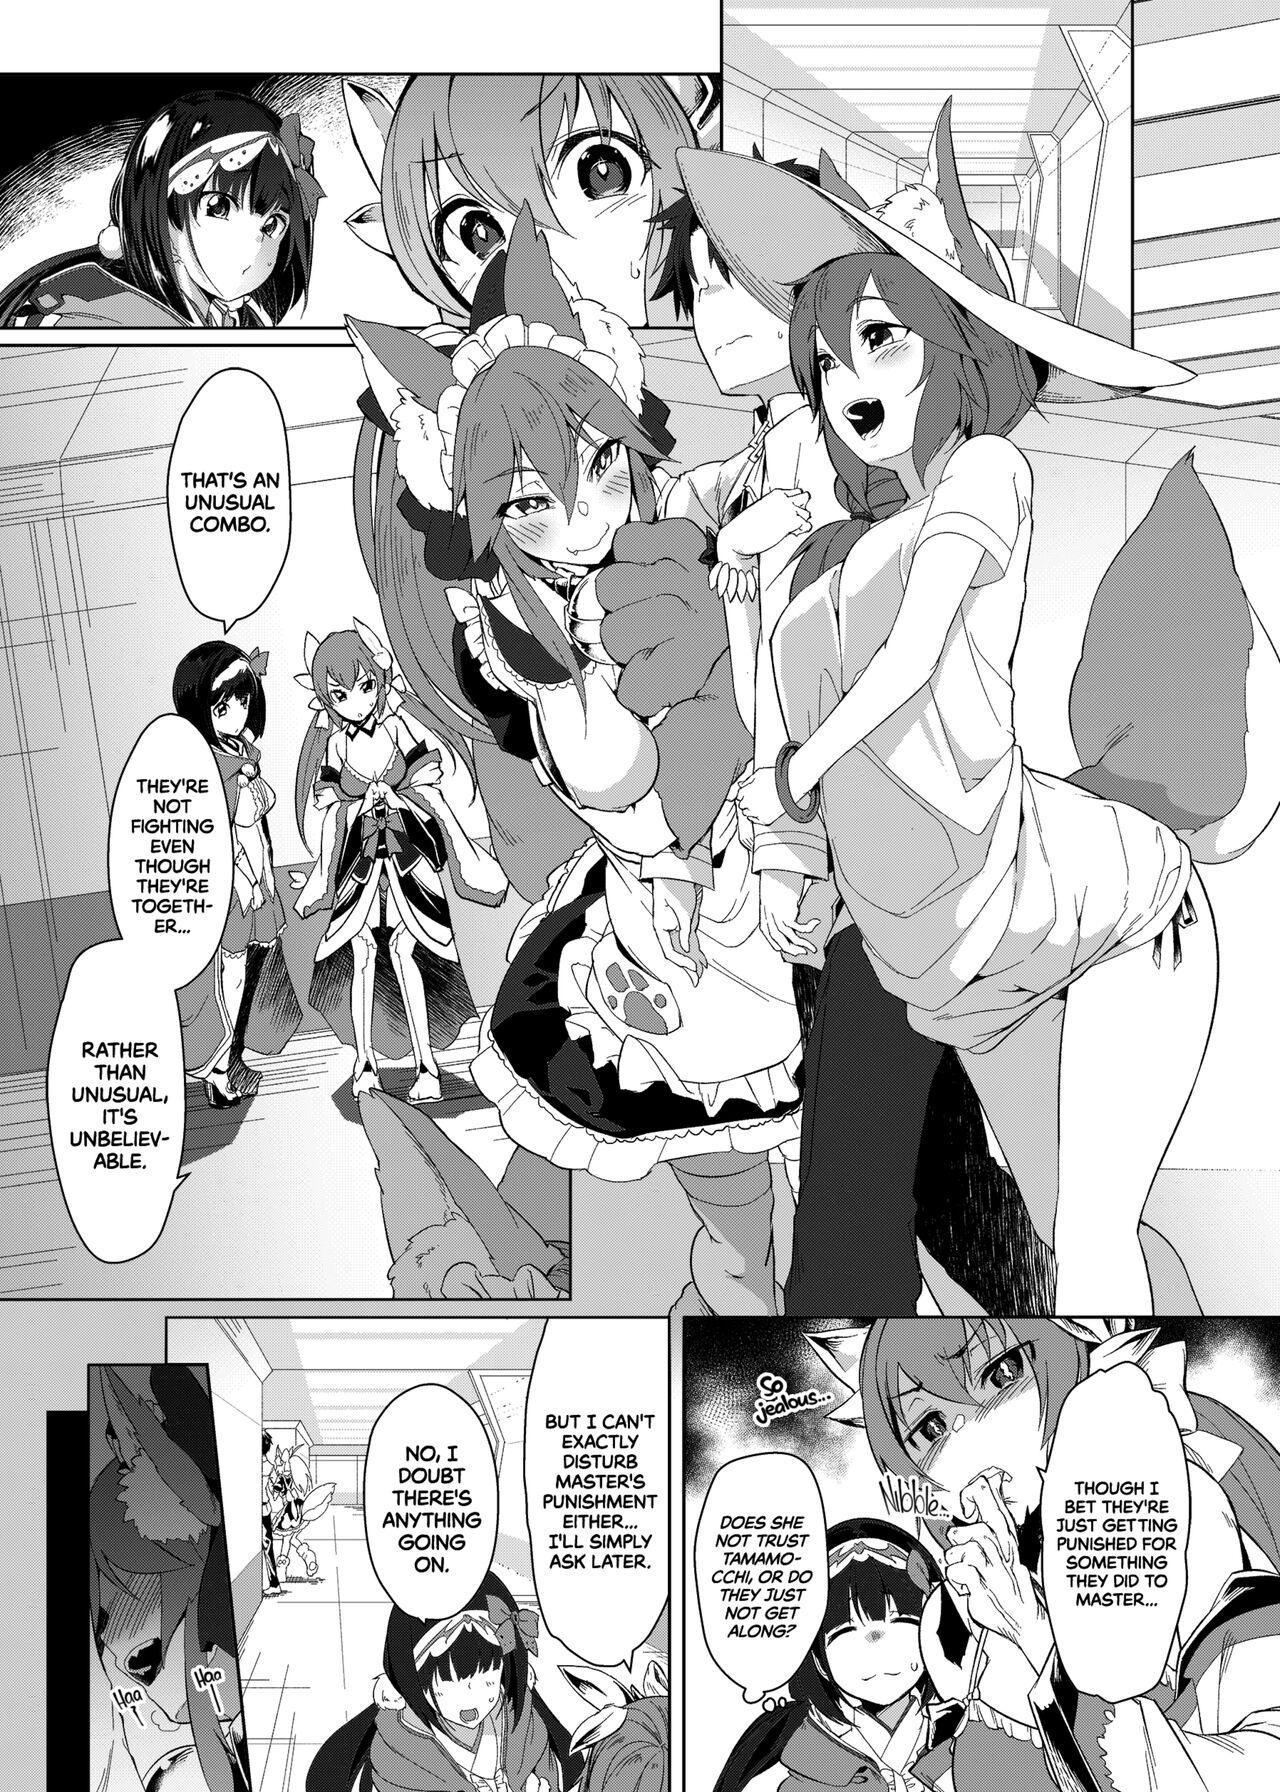 Compilation Hatsujou Cat Fight - Fate grand order Love - Page 3